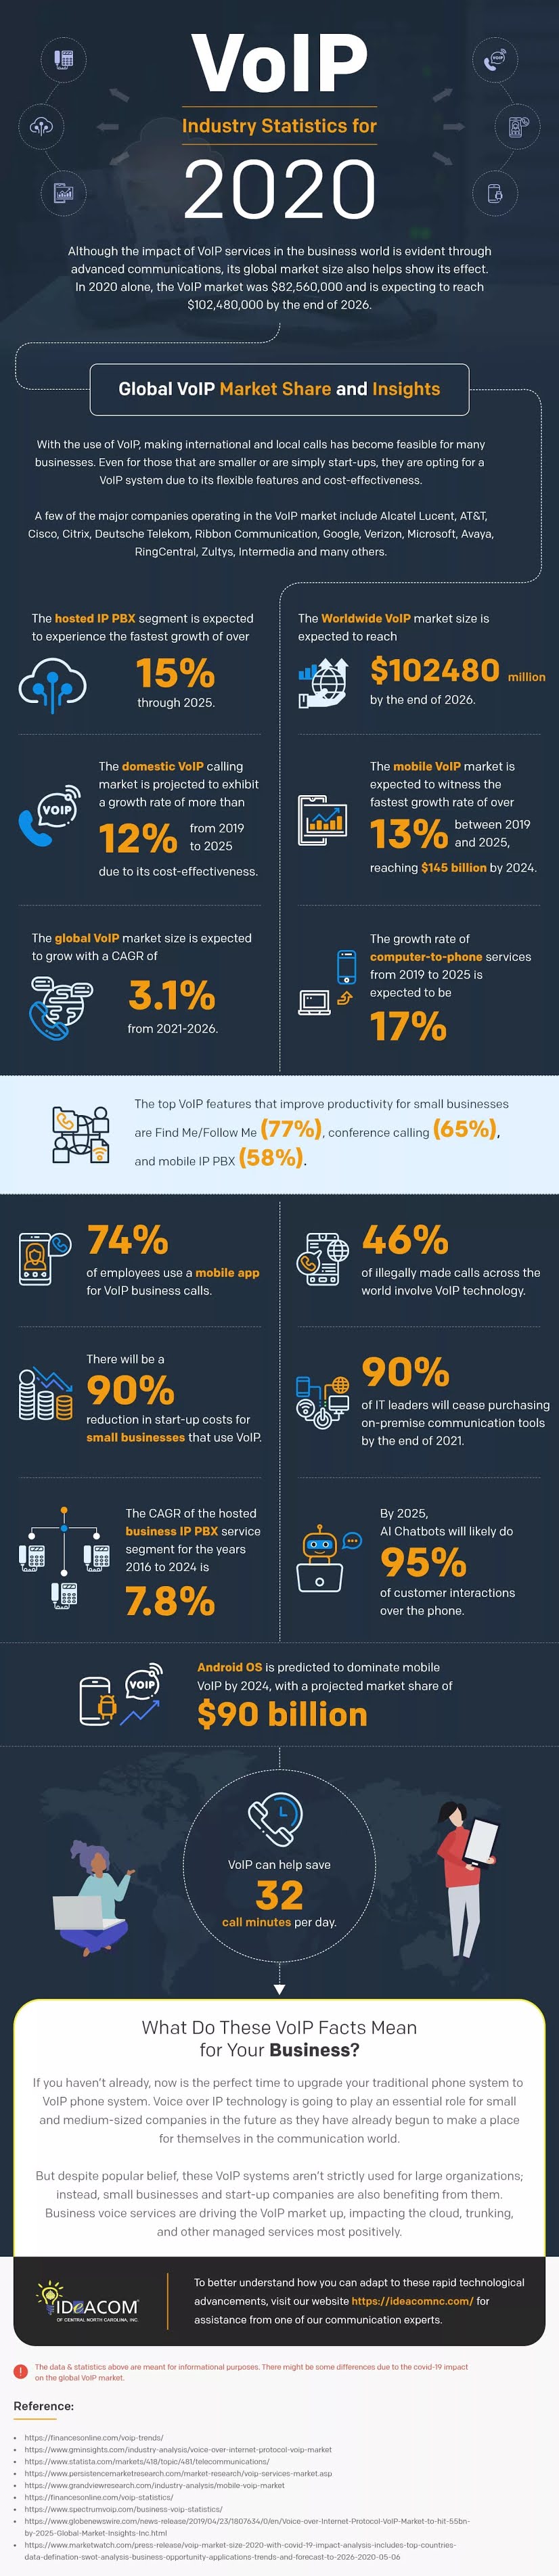 VoIP Industry Statistics 2020 #infographic